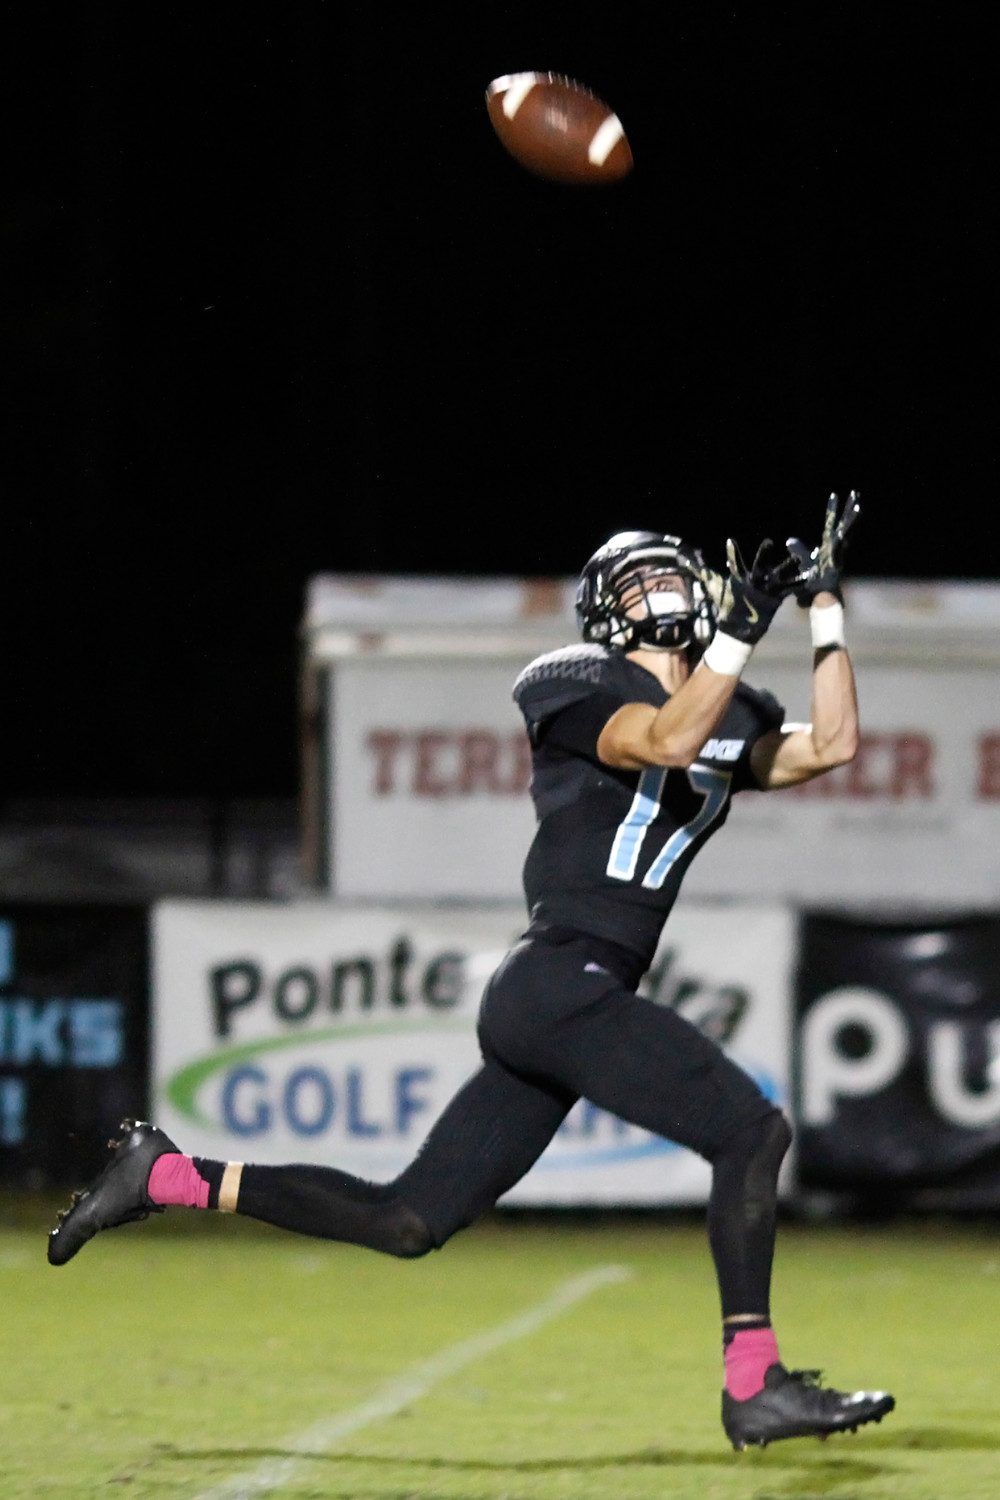 The Sharks’ Tommy Zitiello catches a pass in stride.